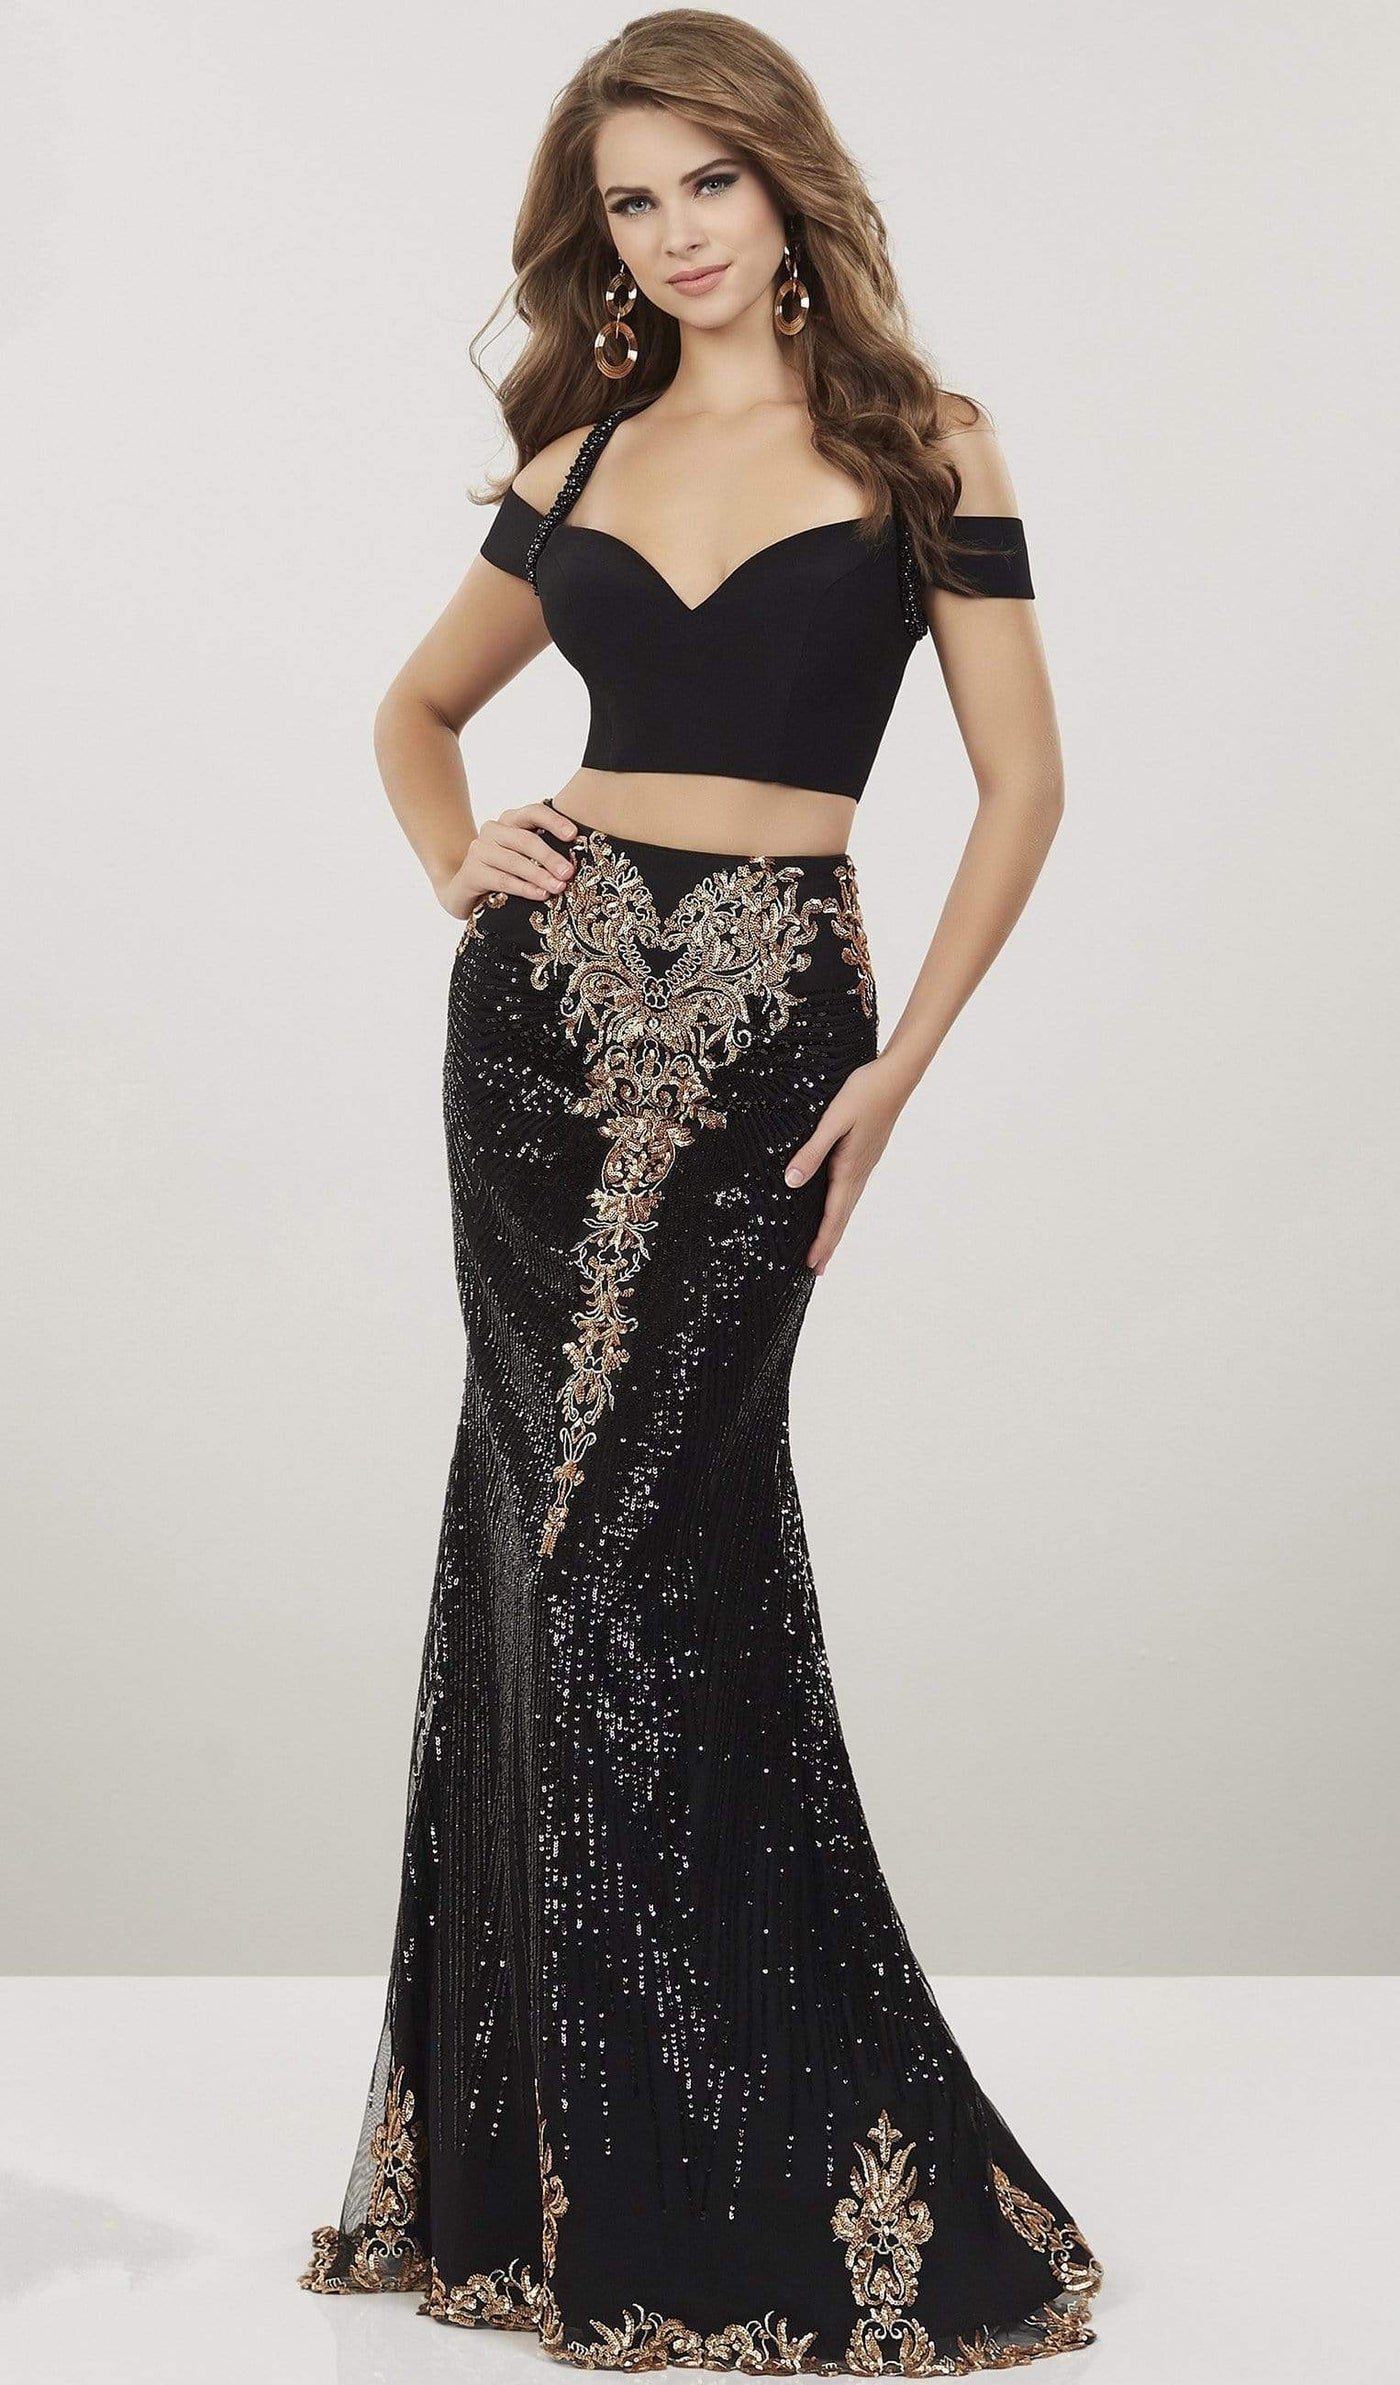 Panoply - 14940 Two Piece Sequined Jersey Trumpet Dress Special Occasion Dress 0 / Black/Gold